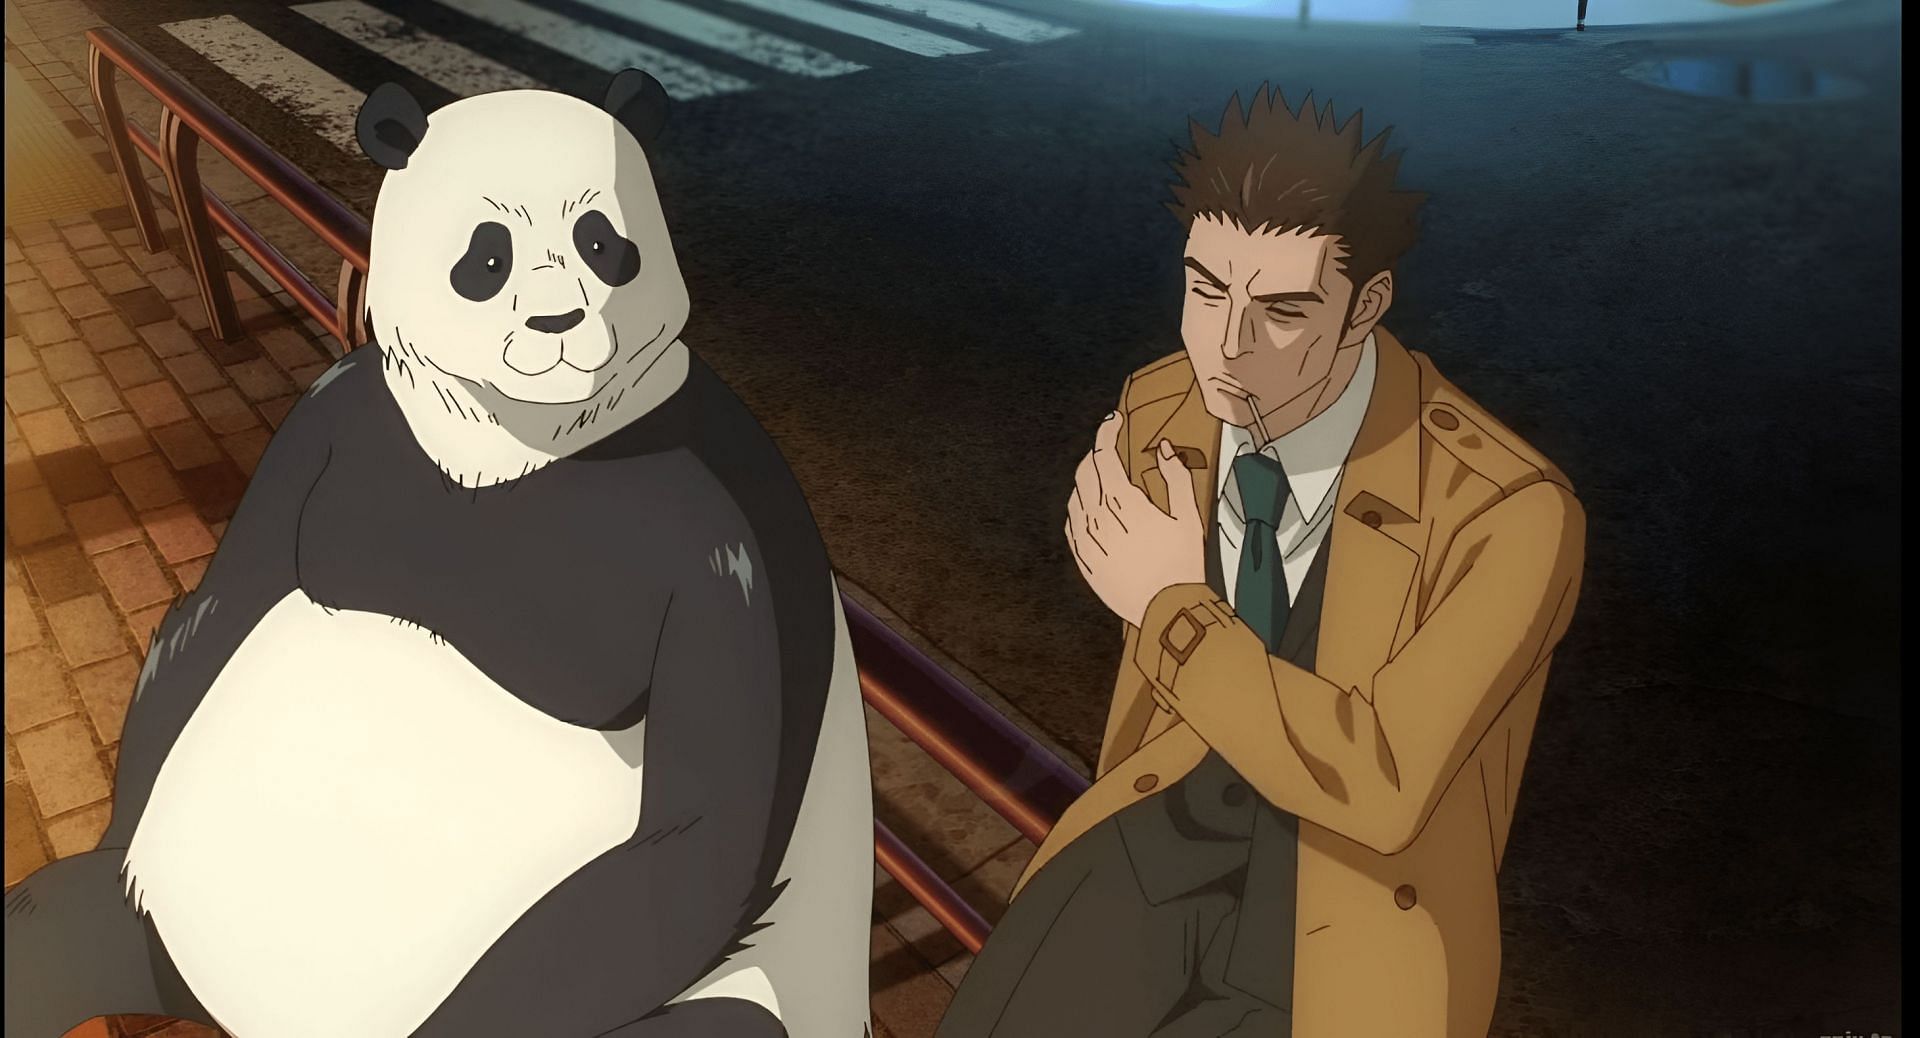 Panda (left) and Kusakabe (right) as seen in the anime (Image via MAPPA)